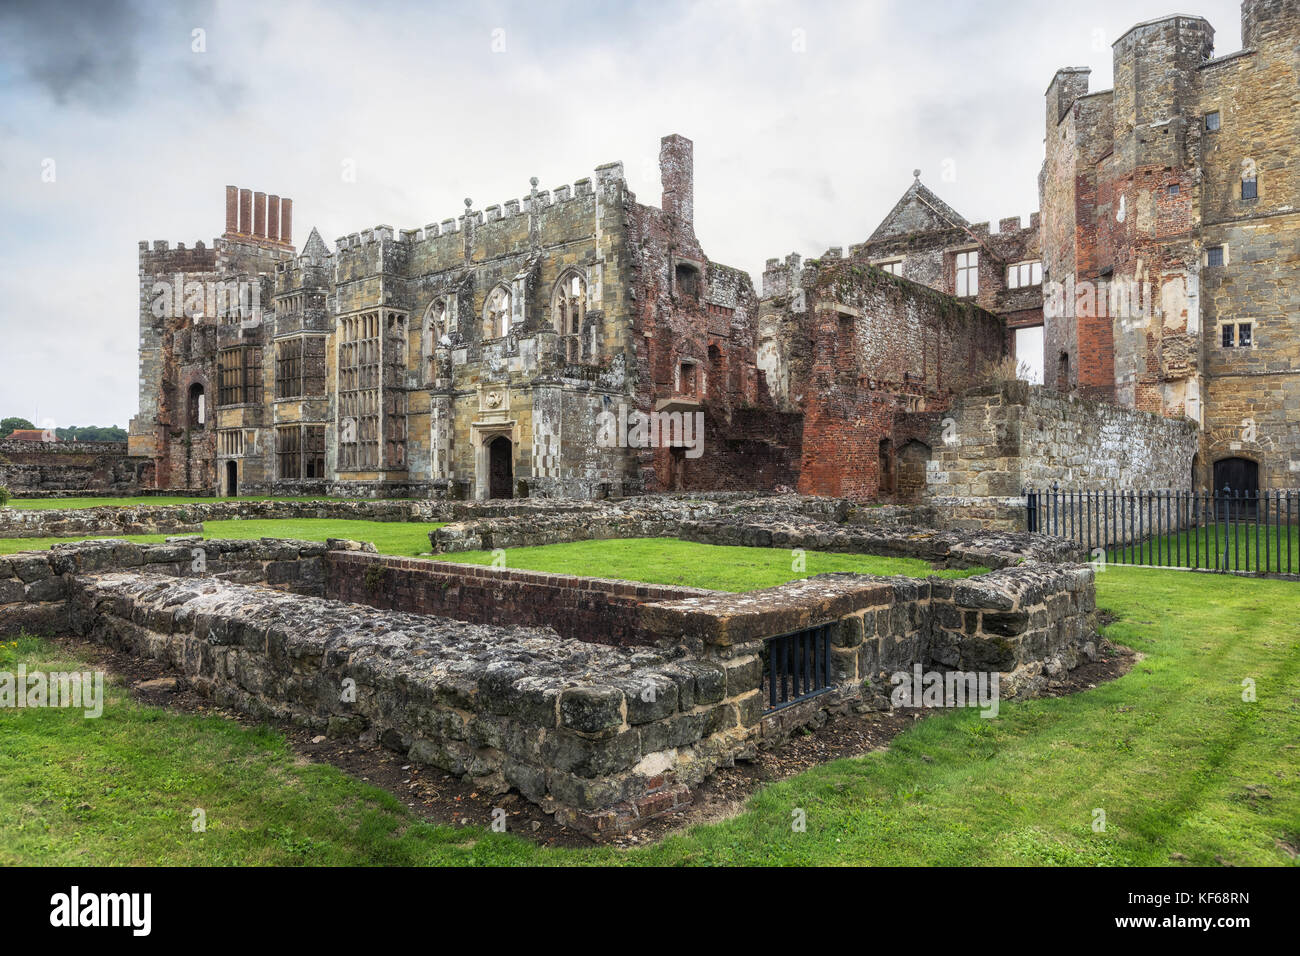 Cowdray House, Midhurst, West Sussex, Angleterre, Royaume-Uni Banque D'Images